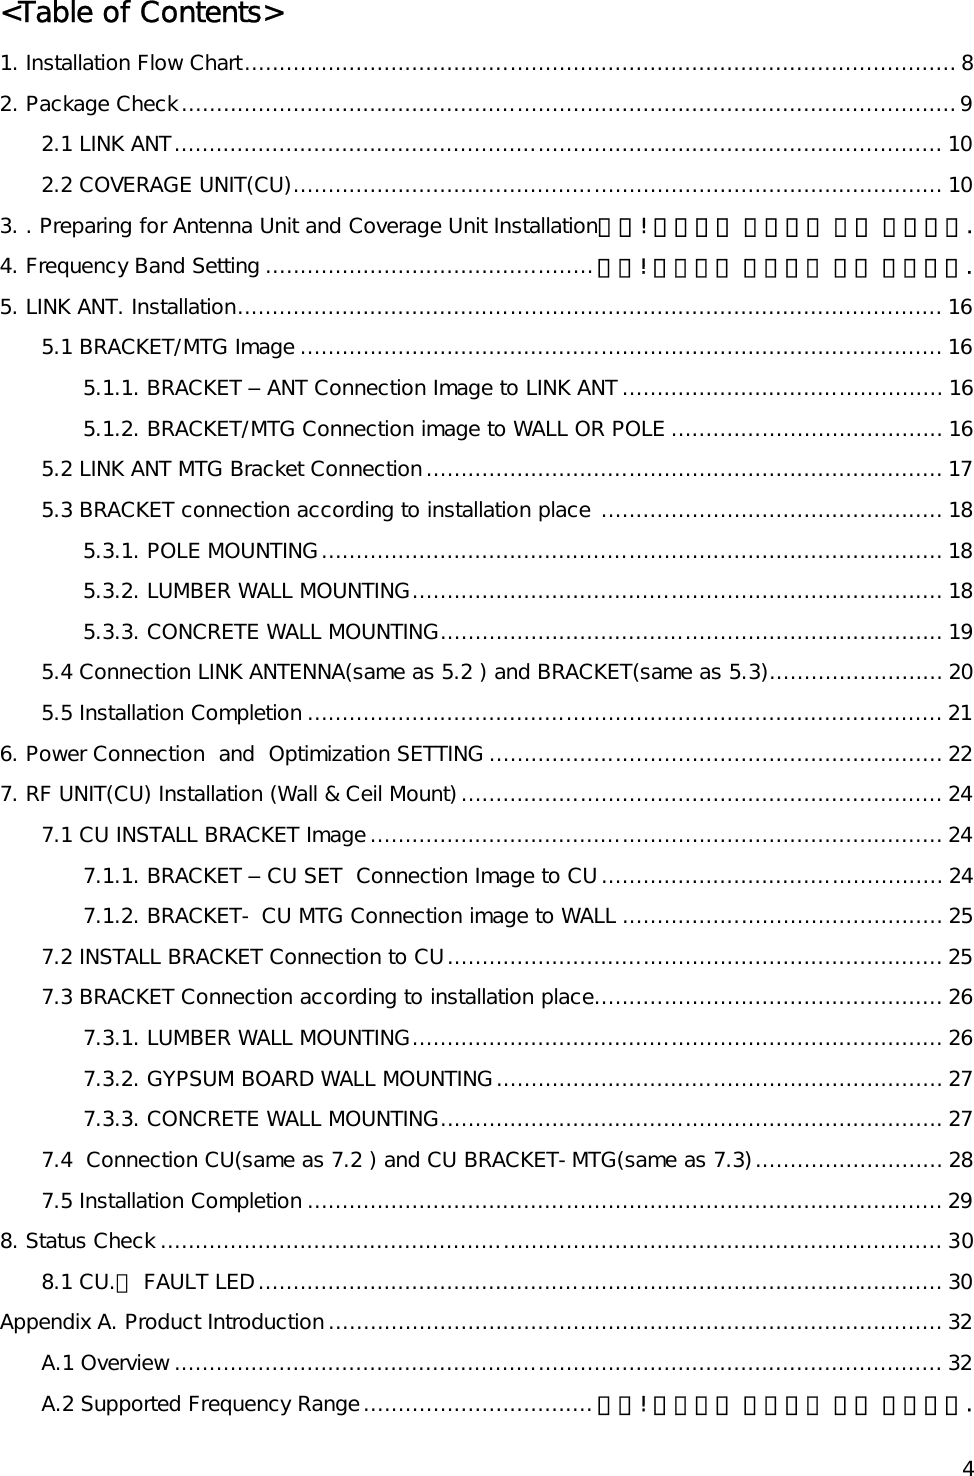   4&lt;Table of Contents&gt; 1. Installation Flow Chart...................................................................................................... 8 2. Package Check...............................................................................................................9 2.1 LINK ANT.............................................................................................................. 10 2.2 COVERAGE UNIT(CU)............................................................................................. 10 3. . Preparing for Antenna Unit and Coverage Unit Installation오류! 책갈피가 정의되어 있지 않습니다. 4. Frequency Band Setting ...............................................오류! 책갈피가 정의되어 있지 않습니다. 5. LINK ANT. Installation..................................................................................................... 16 5.1 BRACKET/MTG Image ............................................................................................ 16 5.1.1. BRACKET – ANT Connection Image to LINK ANT.............................................. 16 5.1.2. BRACKET/MTG Connection image to WALL OR POLE ....................................... 16 5.2 LINK ANT MTG Bracket Connection.......................................................................... 17 5.3 BRACKET connection according to installation place ................................................. 18 5.3.1. POLE MOUNTING......................................................................................... 18 5.3.2. LUMBER WALL MOUNTING............................................................................ 18 5.3.3. CONCRETE WALL MOUNTING........................................................................ 19 5.4 Connection LINK ANTENNA(same as 5.2 ) and BRACKET(same as 5.3)......................... 20 5.5 Installation Completion ........................................................................................... 21 6. Power Connection  and  Optimization SETTING ................................................................. 22 7. RF UNIT(CU) Installation (Wall &amp; Ceil Mount)..................................................................... 24 7.1 CU INSTALL BRACKET Image.................................................................................. 24 7.1.1. BRACKET – CU SET  Connection Image to CU................................................. 24 7.1.2. BRACKET- CU MTG Connection image to WALL .............................................. 25 7.2 INSTALL BRACKET Connection to CU....................................................................... 25 7.3 BRACKET Connection according to installation place.................................................. 26 7.3.1. LUMBER WALL MOUNTING............................................................................ 26 7.3.2. GYPSUM BOARD WALL MOUNTING................................................................ 27 7.3.3. CONCRETE WALL MOUNTING........................................................................ 27 7.4  Connection CU(same as 7.2 ) and CU BRACKET-MTG(same as 7.3)........................... 28 7.5 Installation Completion ........................................................................................... 29 8. Status Check ................................................................................................................ 30 8.1 CU.의 FAULT LED.................................................................................................. 30 Appendix A. Product Introduction........................................................................................ 32 A.1 Overview .............................................................................................................. 32 A.2 Supported Frequency Range................................. 오류! 책갈피가 정의되어 있지 않습니다. 